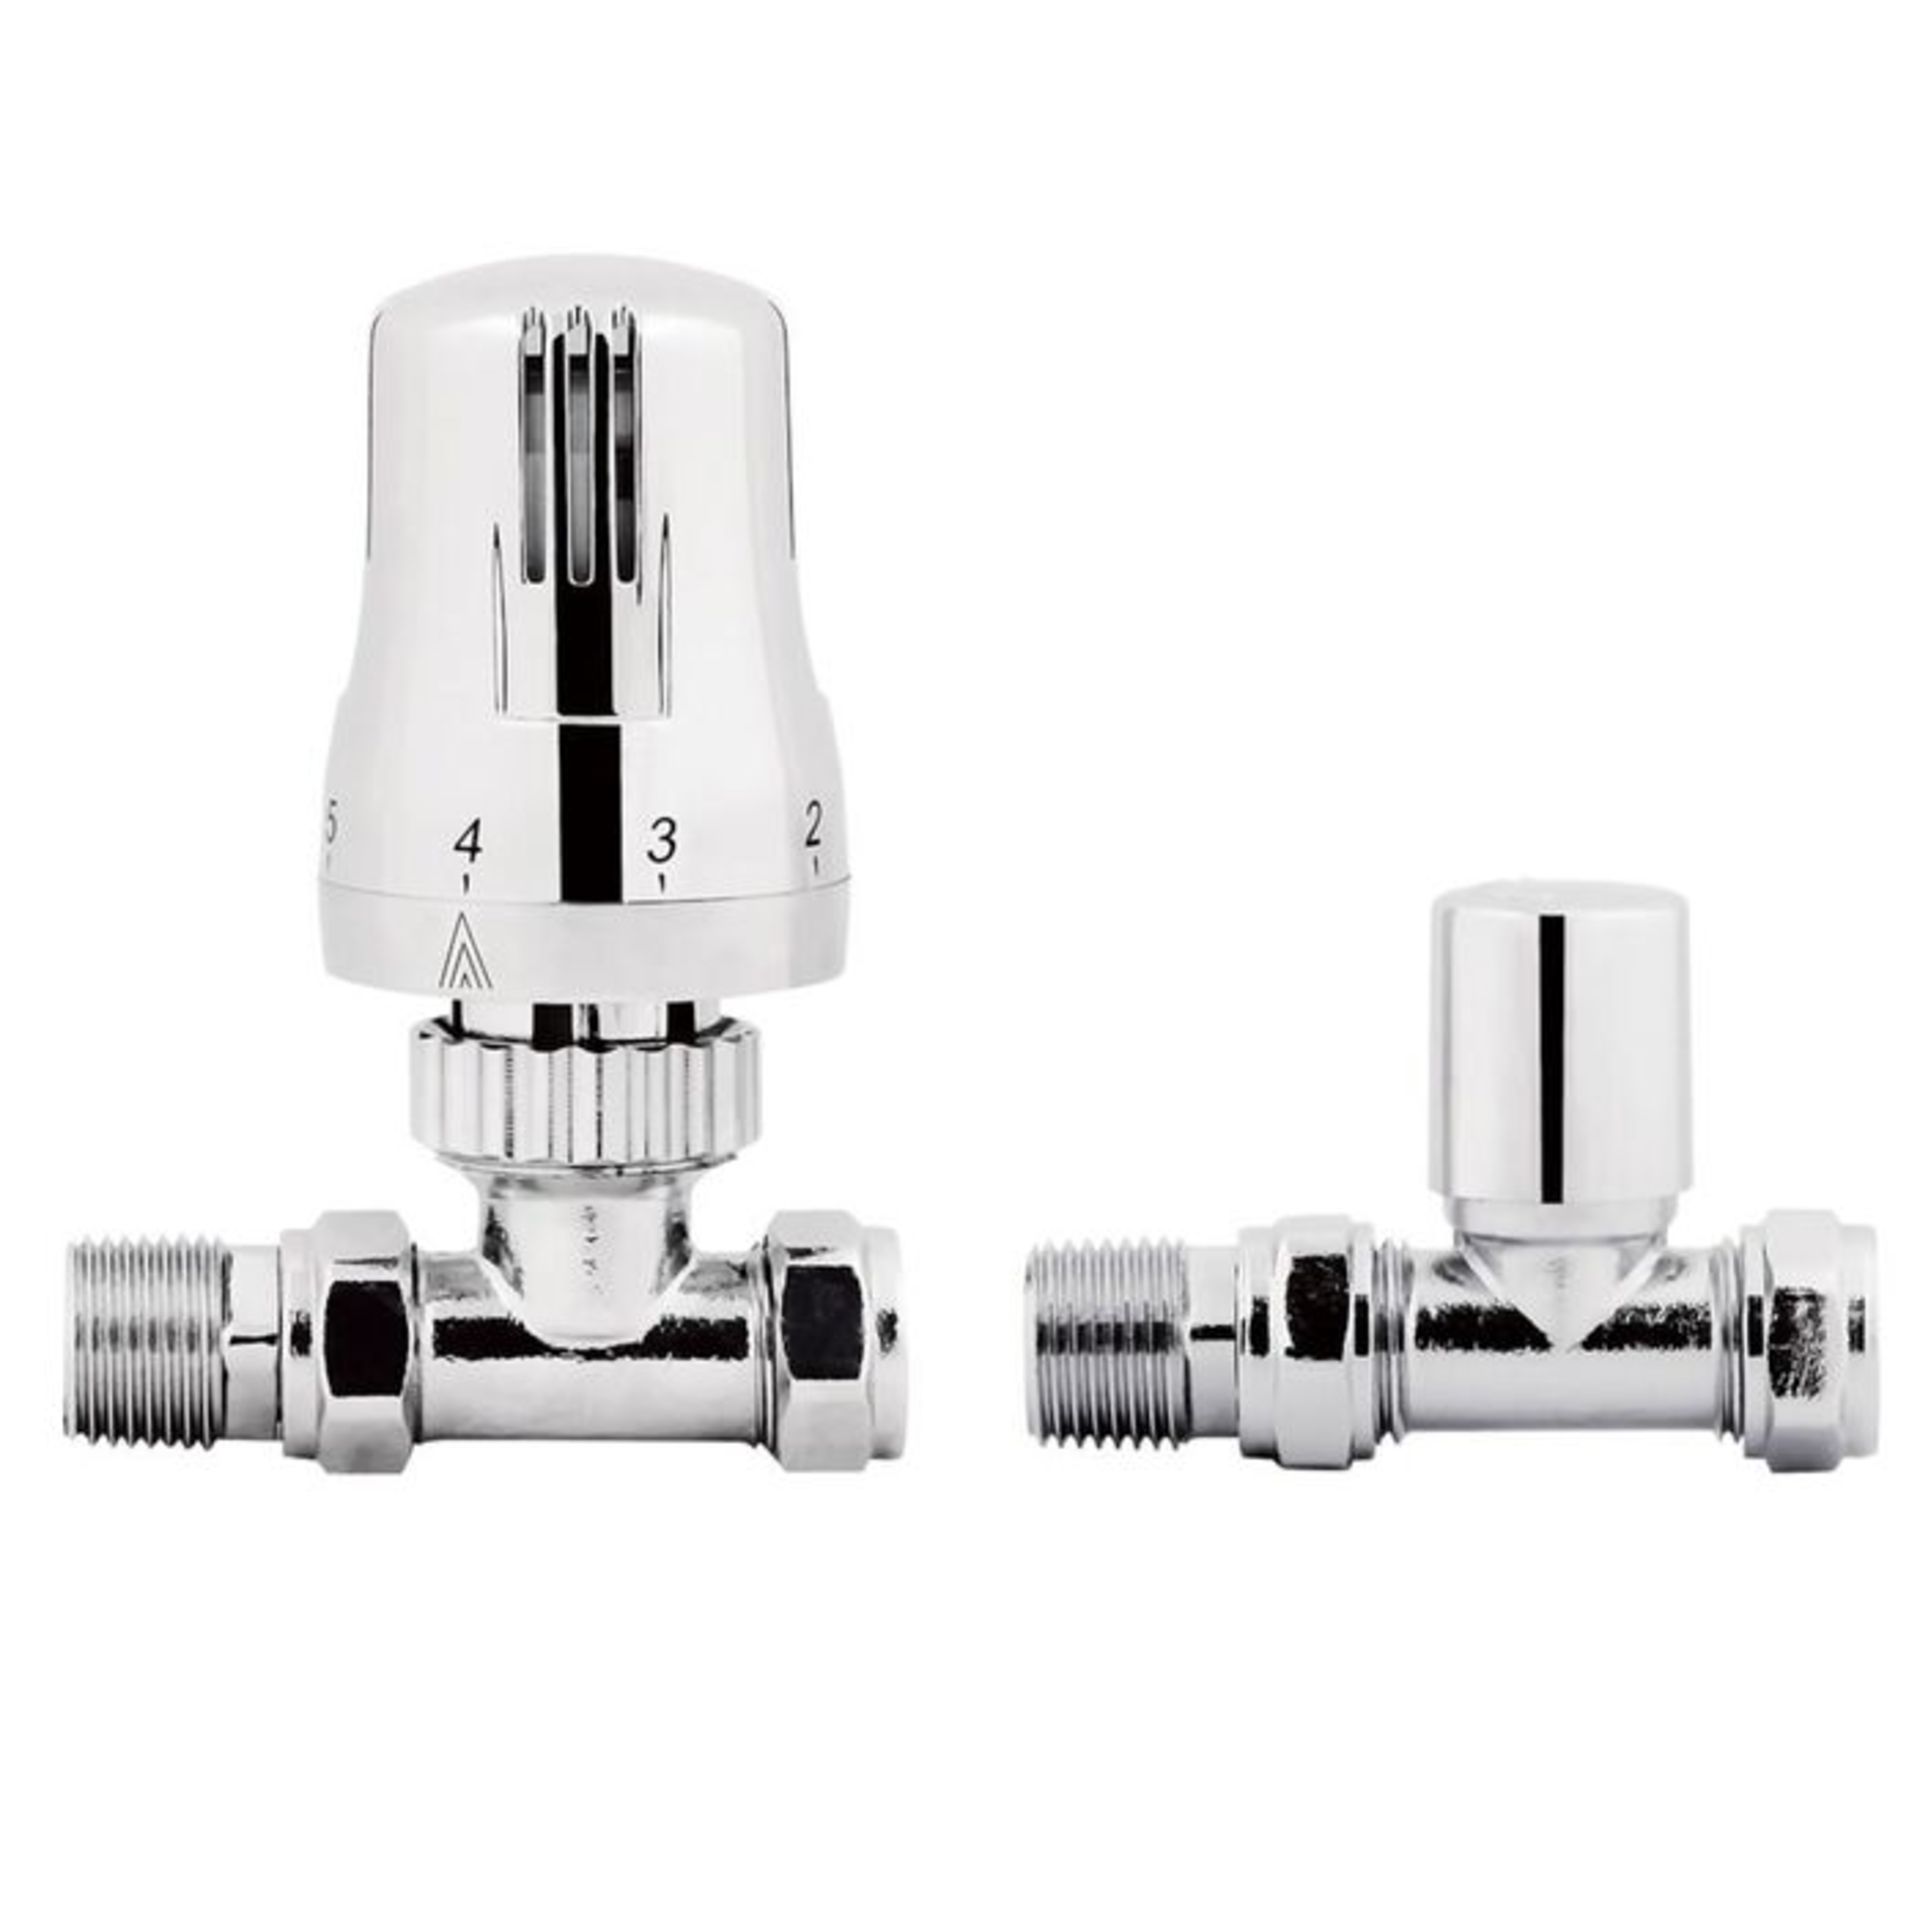 (EE1006) 15mm Standard Connection Thermostatic Straight Chrome Radiator Valves Chrome Plated S... - Image 3 of 3